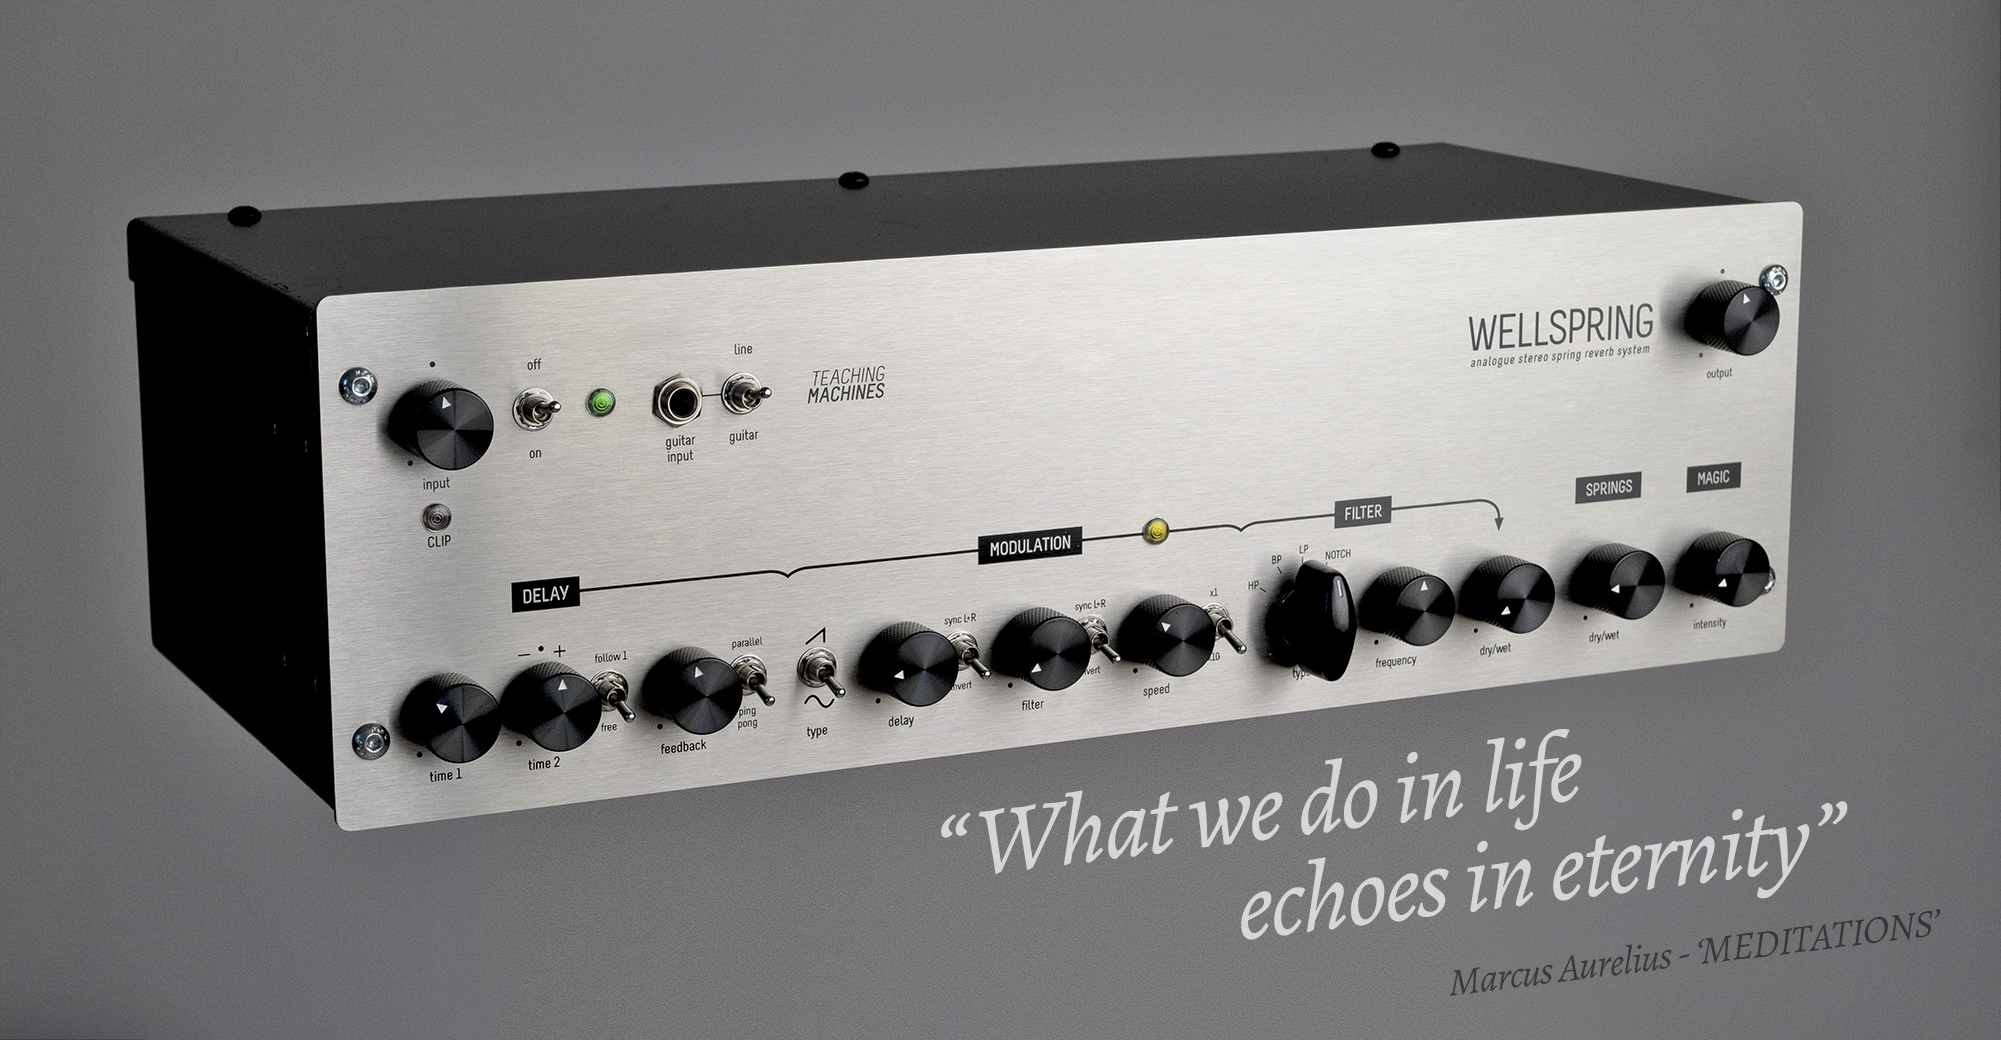 What we do in life echoes in eternity - The Wellspring reverb unit can be made to feedback on itself creating infinite reverb tails.